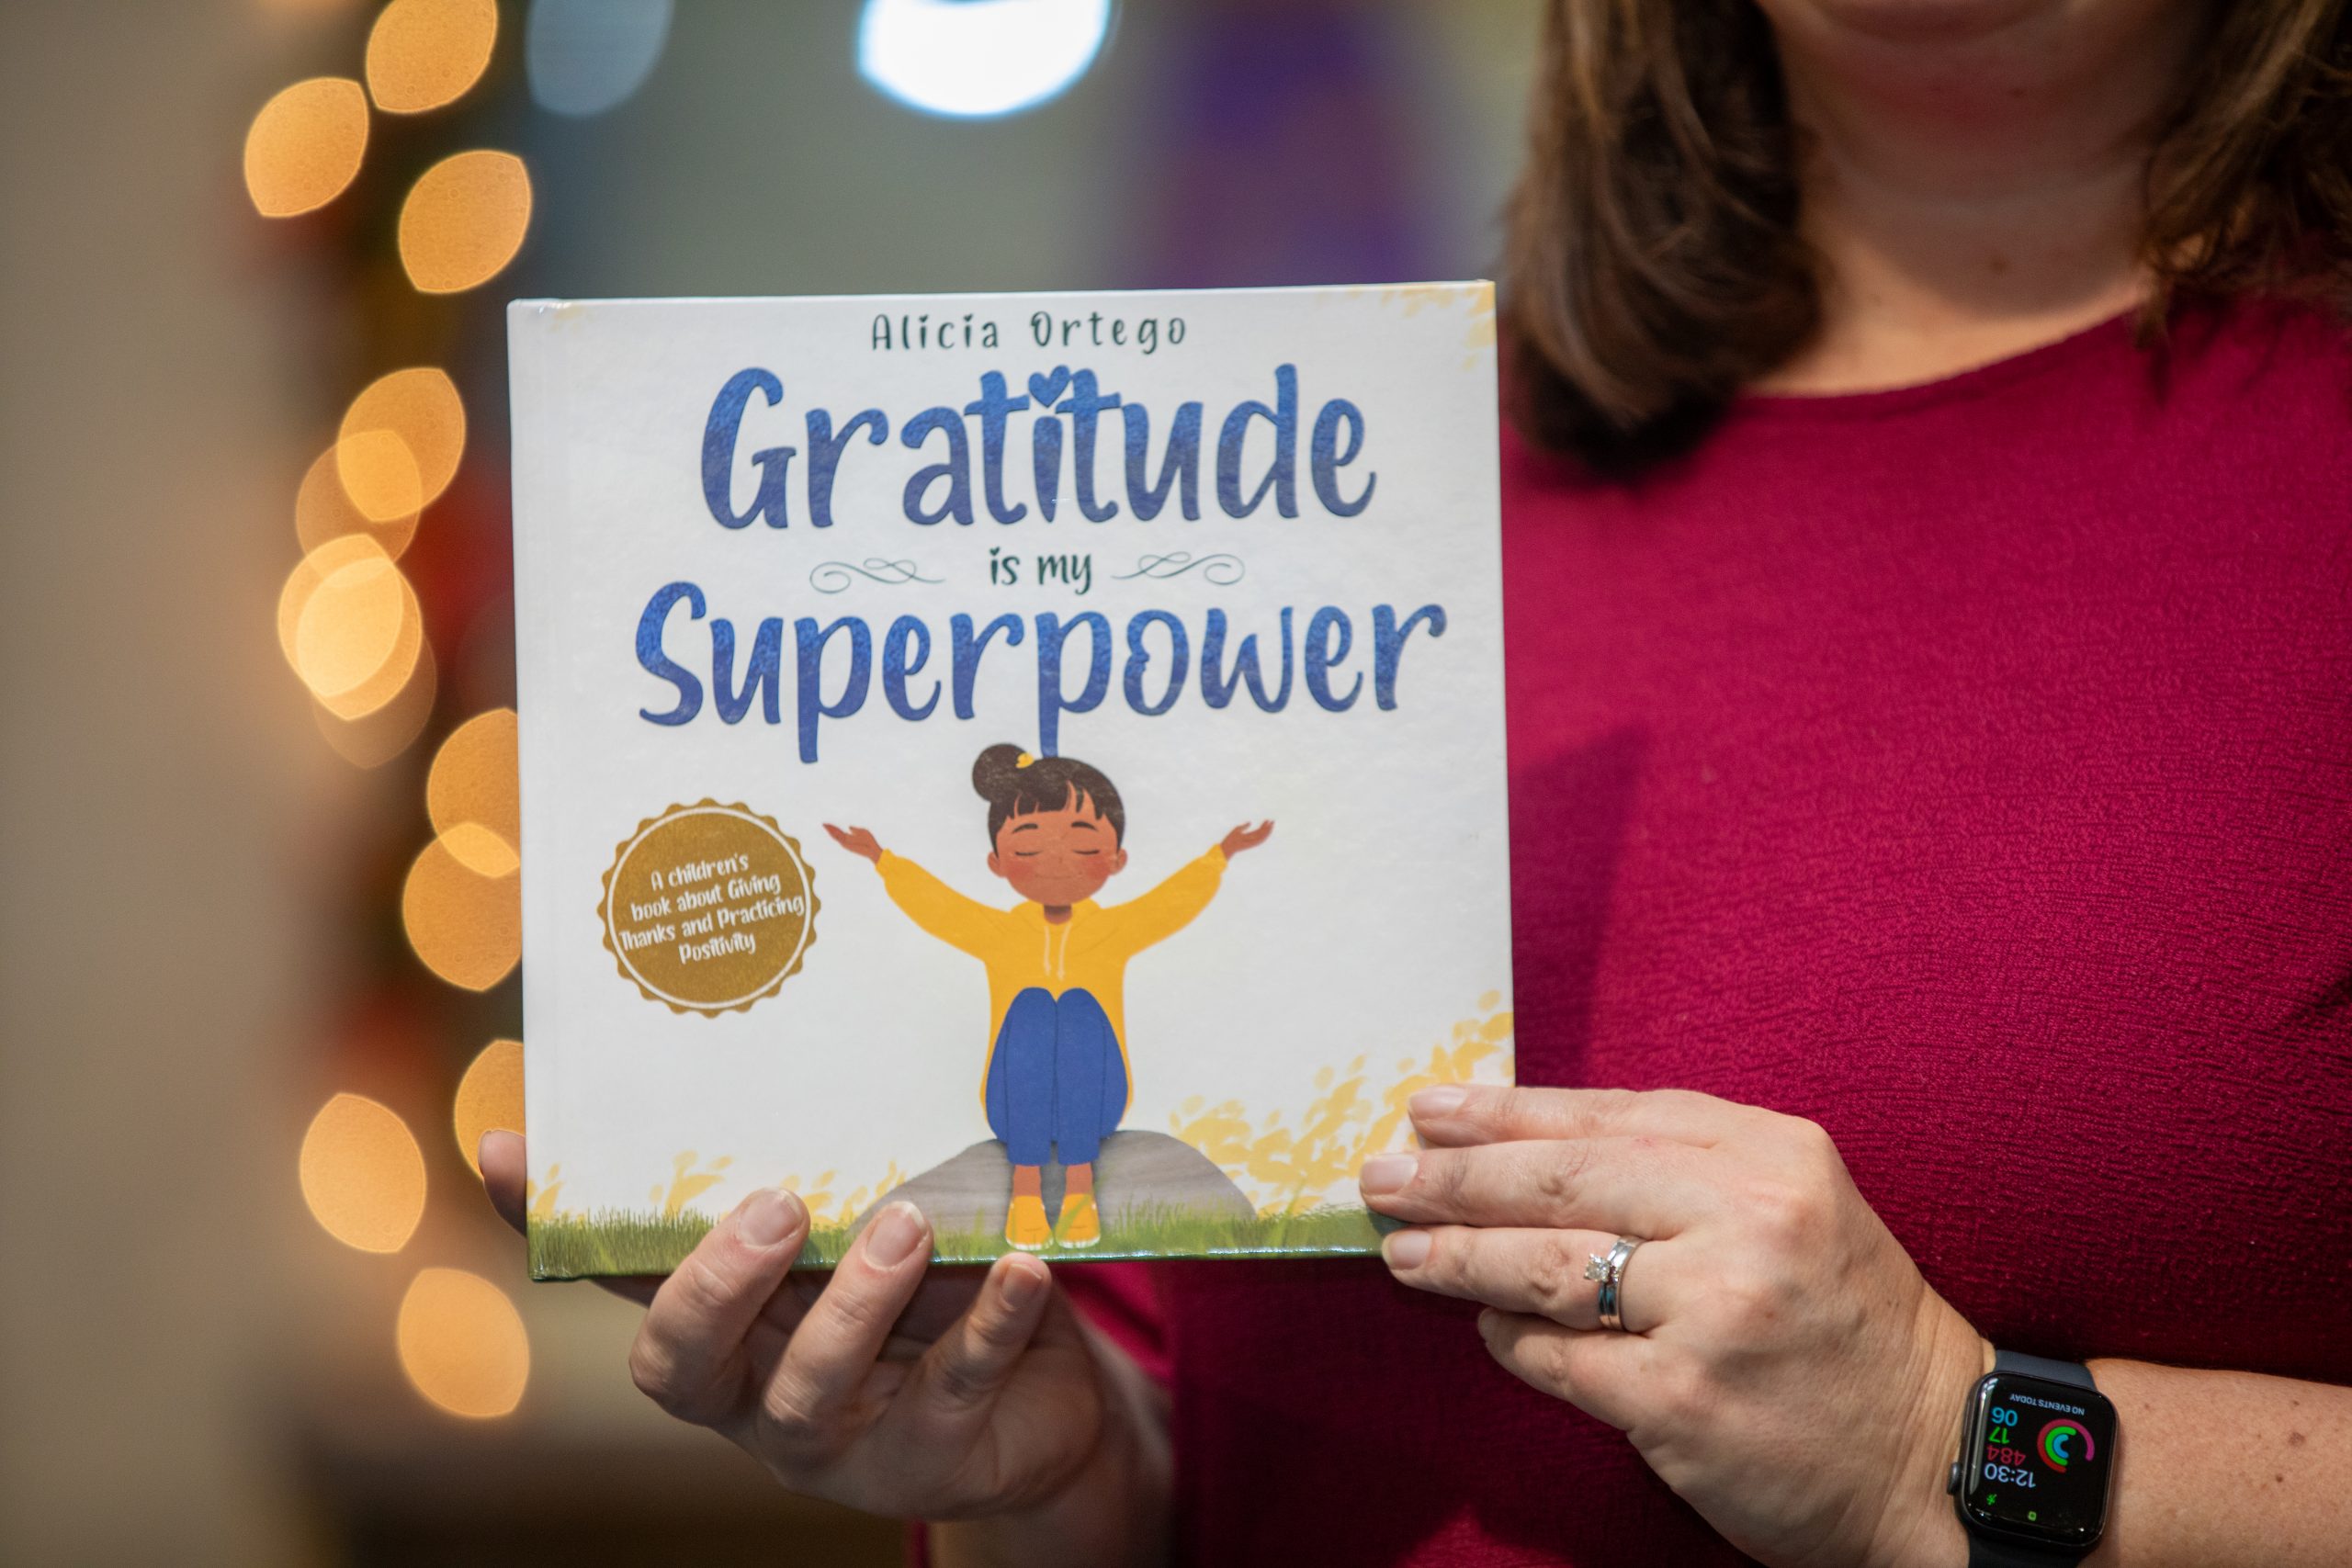 The front cover of "Gratitude is my Superpower" by Alicia Ortego.